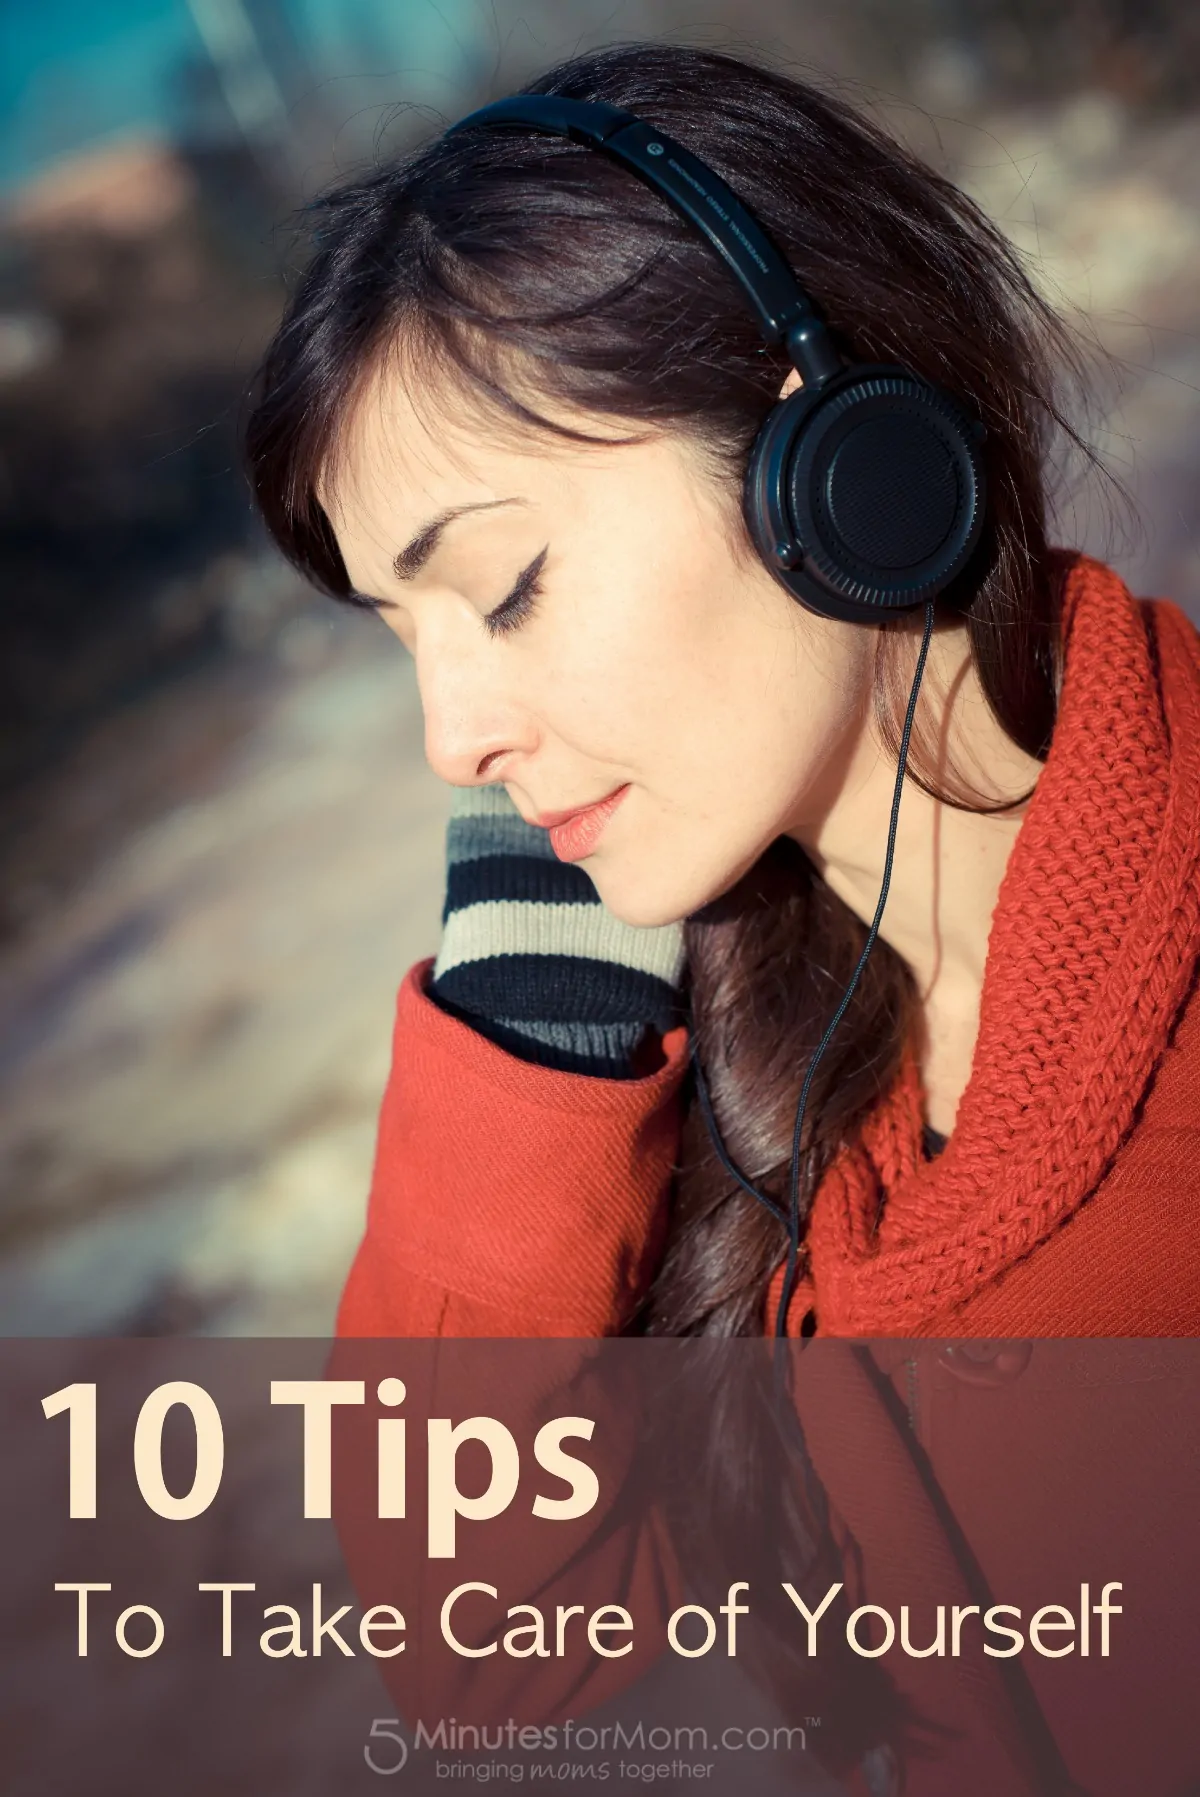 10 Tips to Take Care of Yourself